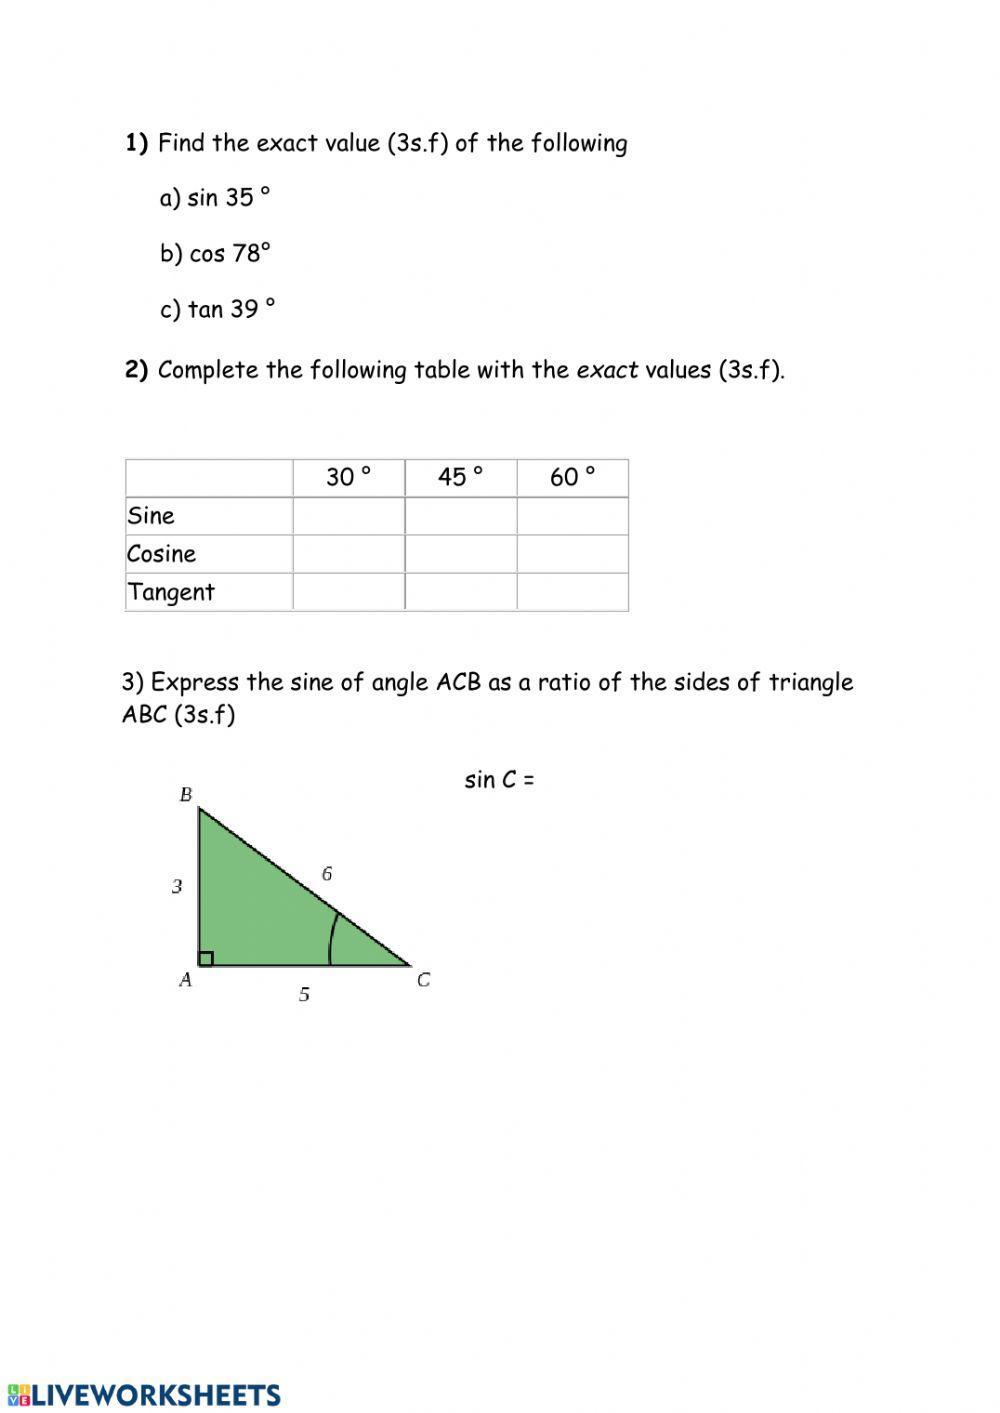 Finding missing sides - Trig ratios